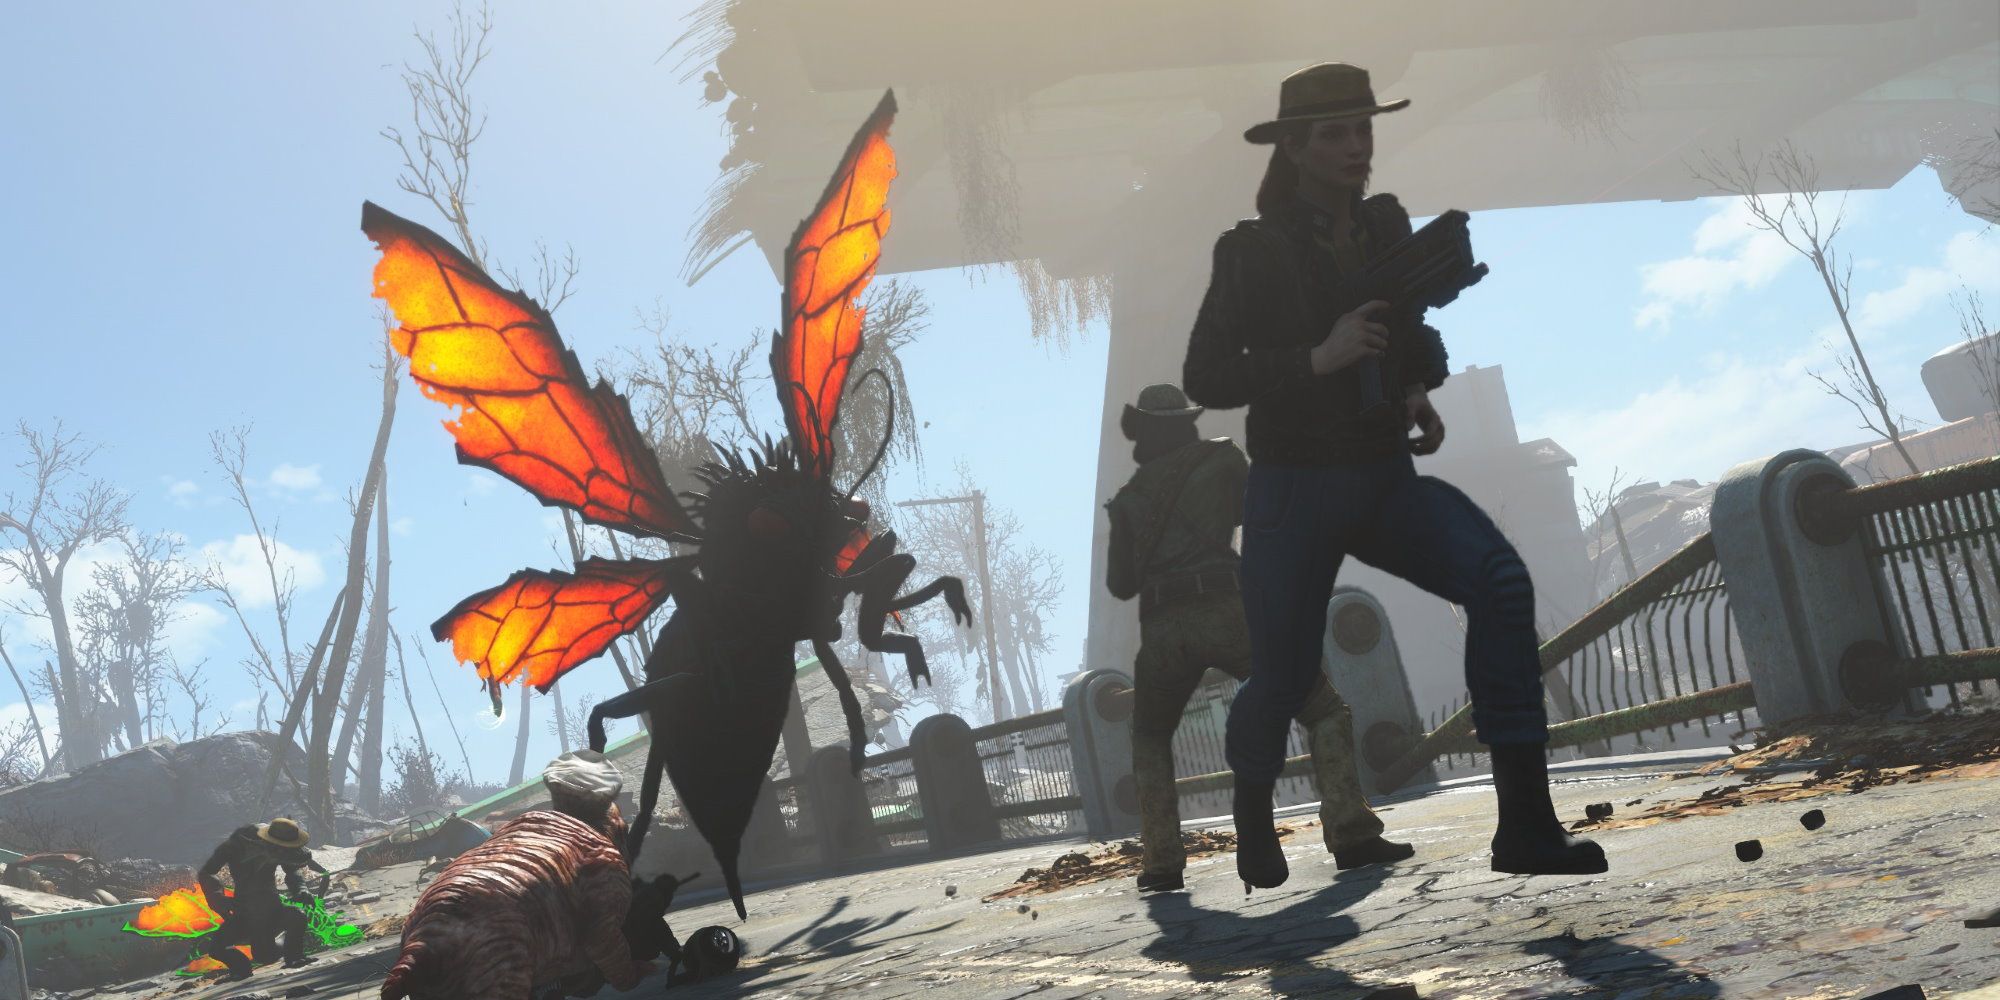 You Can Now Add Cazadores To Fallout 4 In Case You Hate Yourself